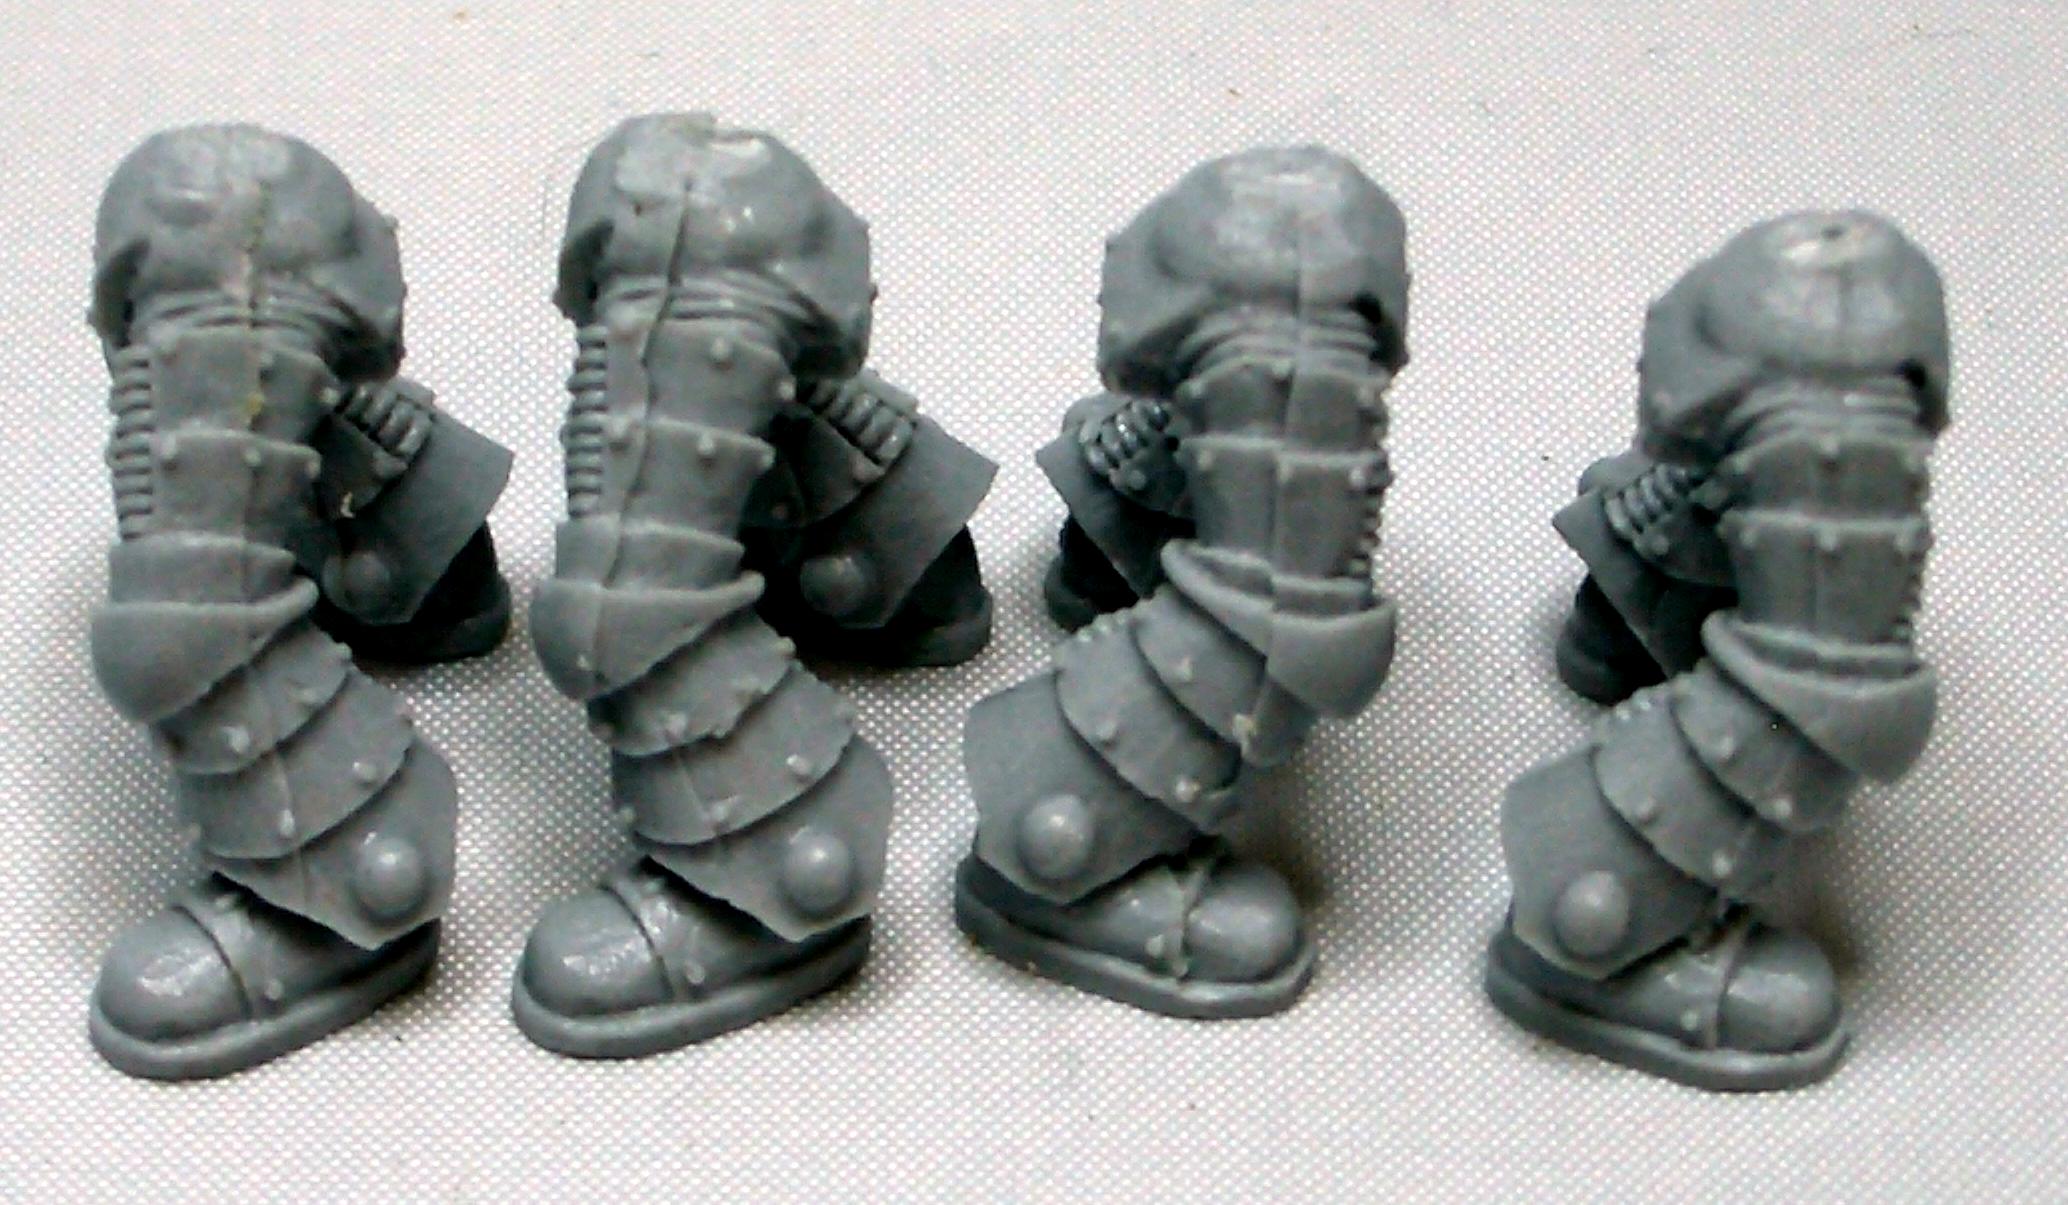 Astral, Astral Claws, Claws, Space Marines, Warhammer 40,000, Work In Progress